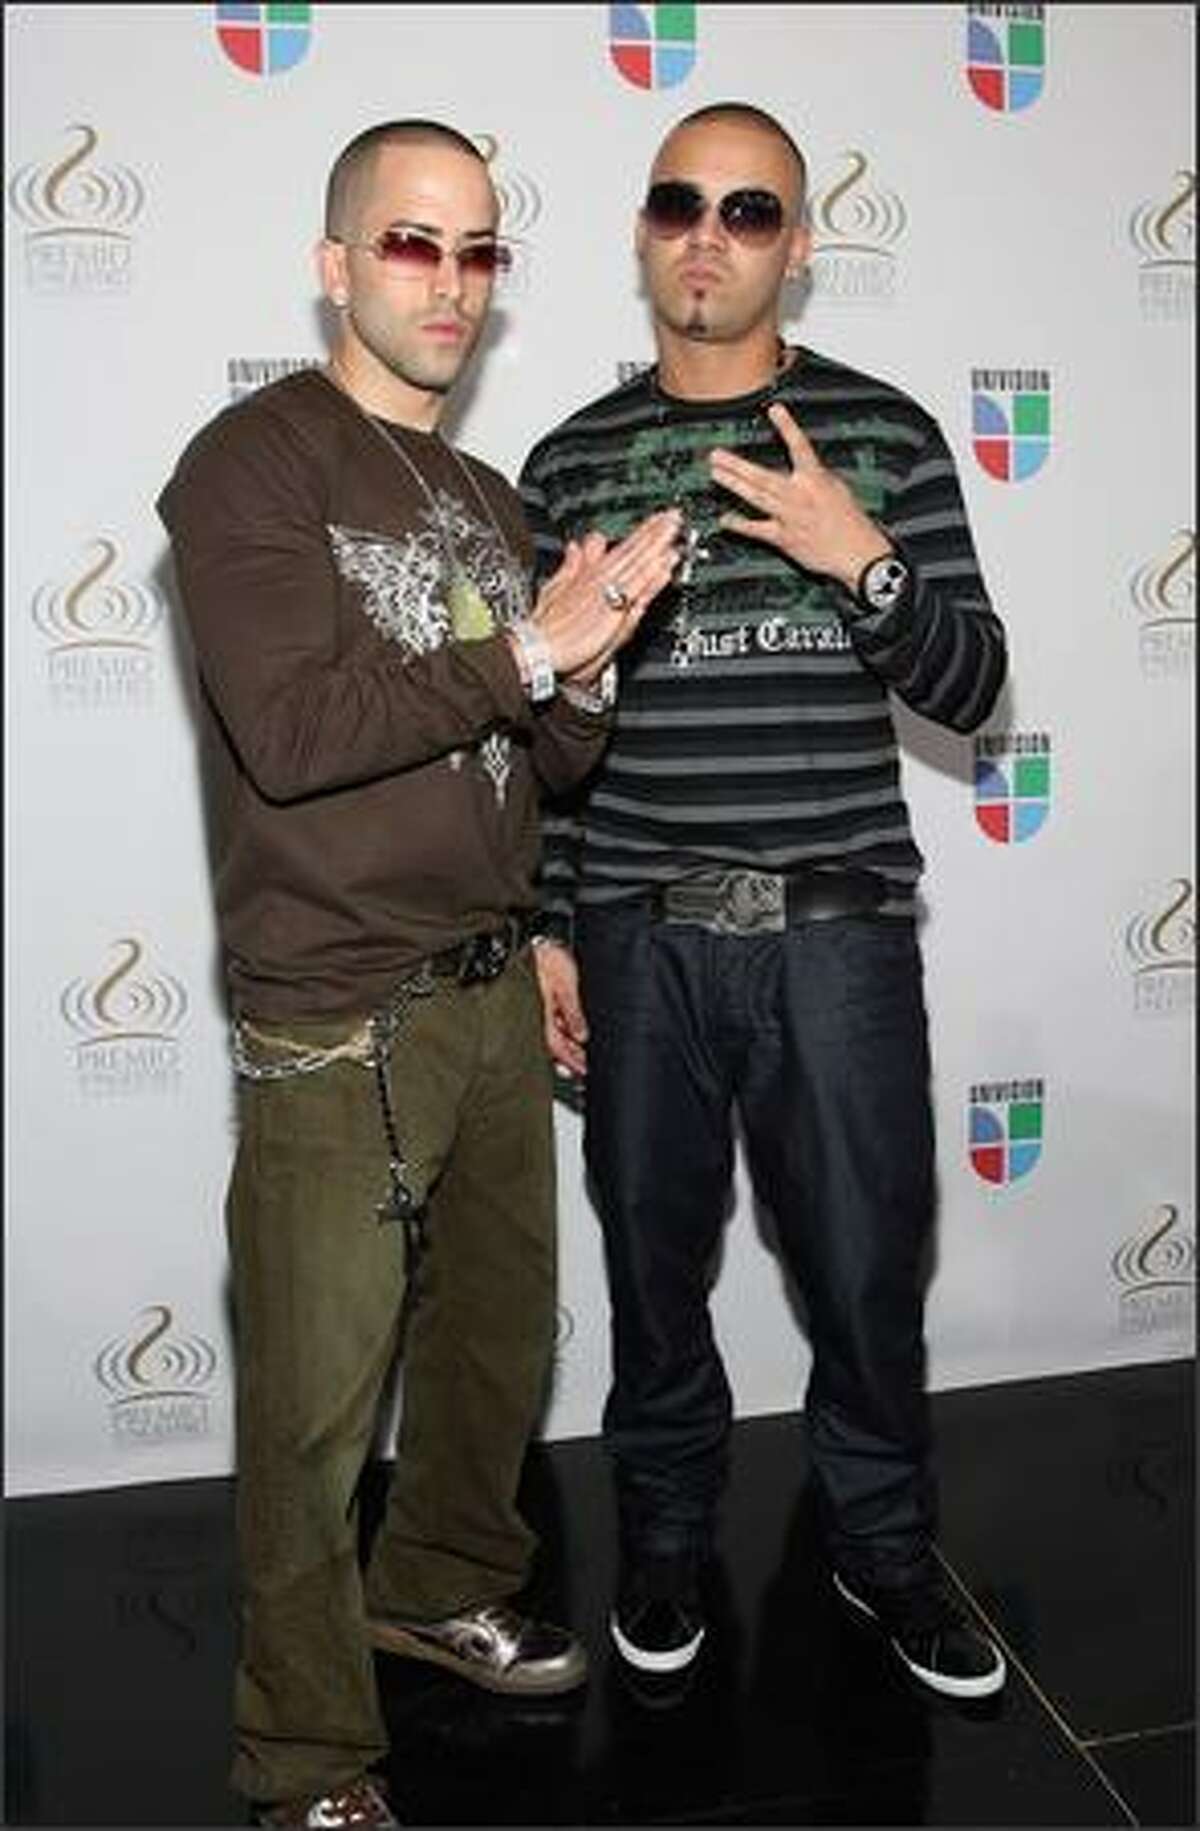 Recording artists Yandel and Wisin pose at Bongos Cuban Cafe during a press conference to announce the nominees for the 2008 Premio lo Nuestro a la Musica Latina awards show at the Bongos Cuban Cafe on December 12, 2007 in Miami, Florida.